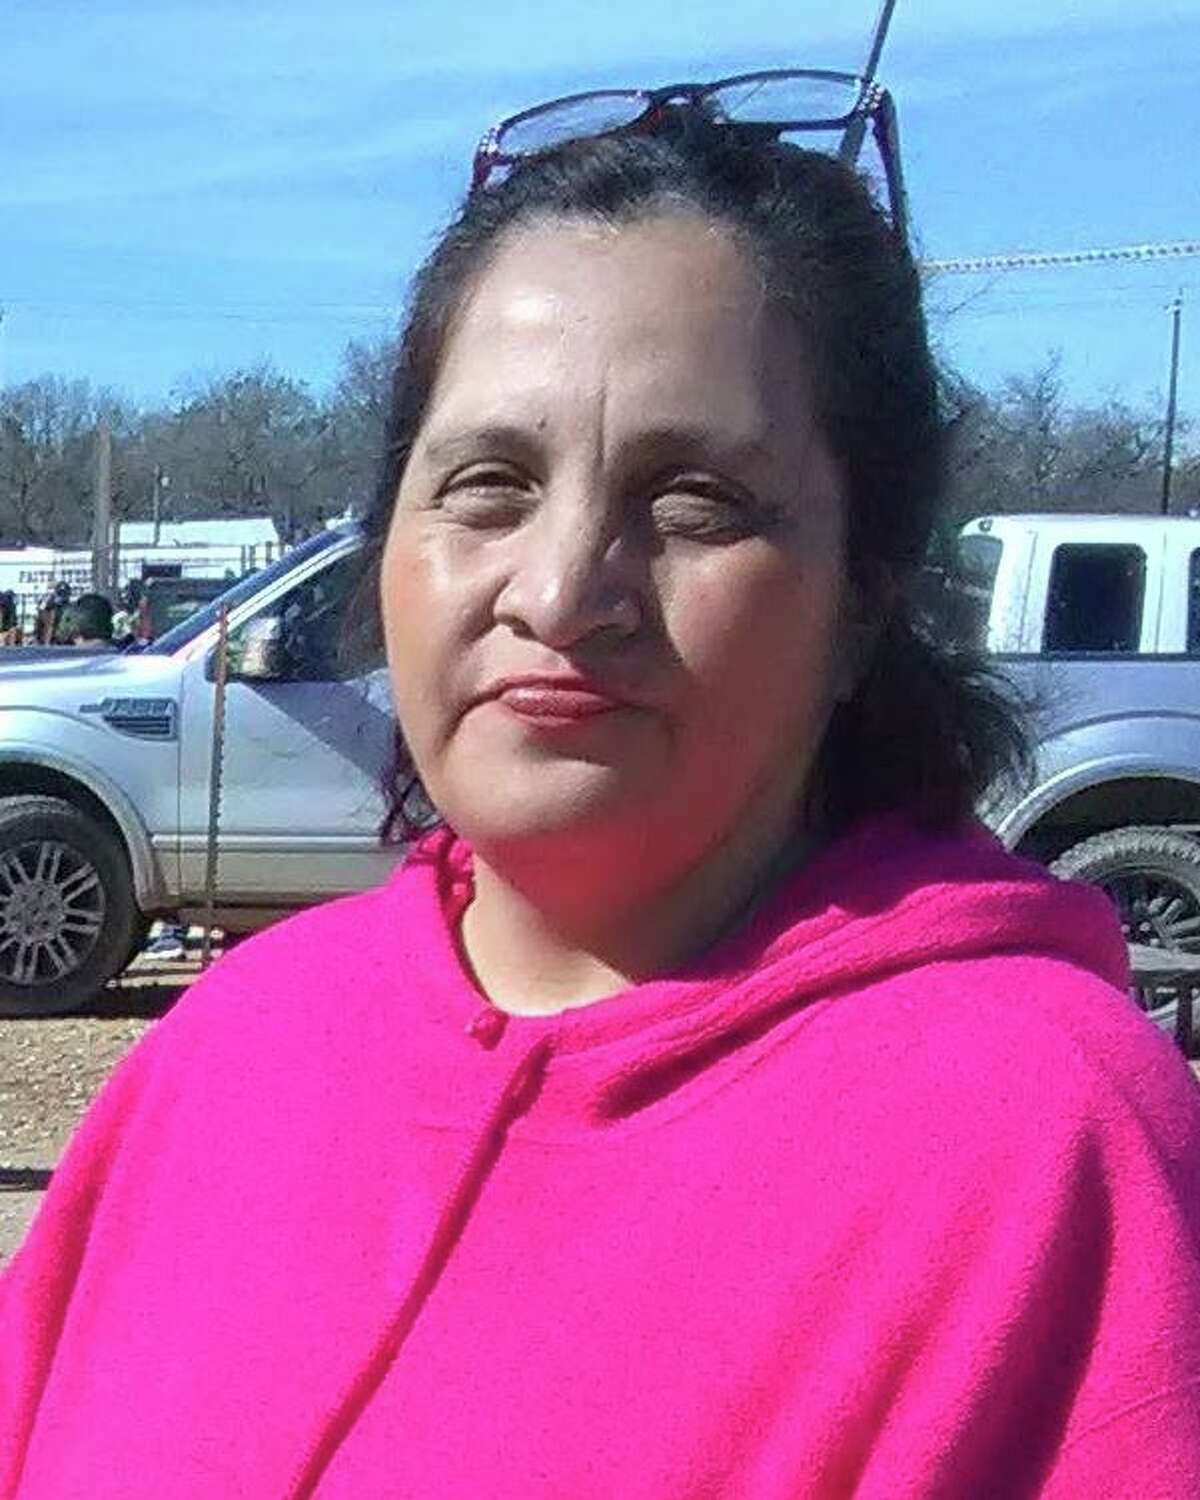 Esther Rodriguez Conde, 52, was killed Thursday, October 14, 2021 when the vehicle she was riding in was swpt off the road by flood waters.